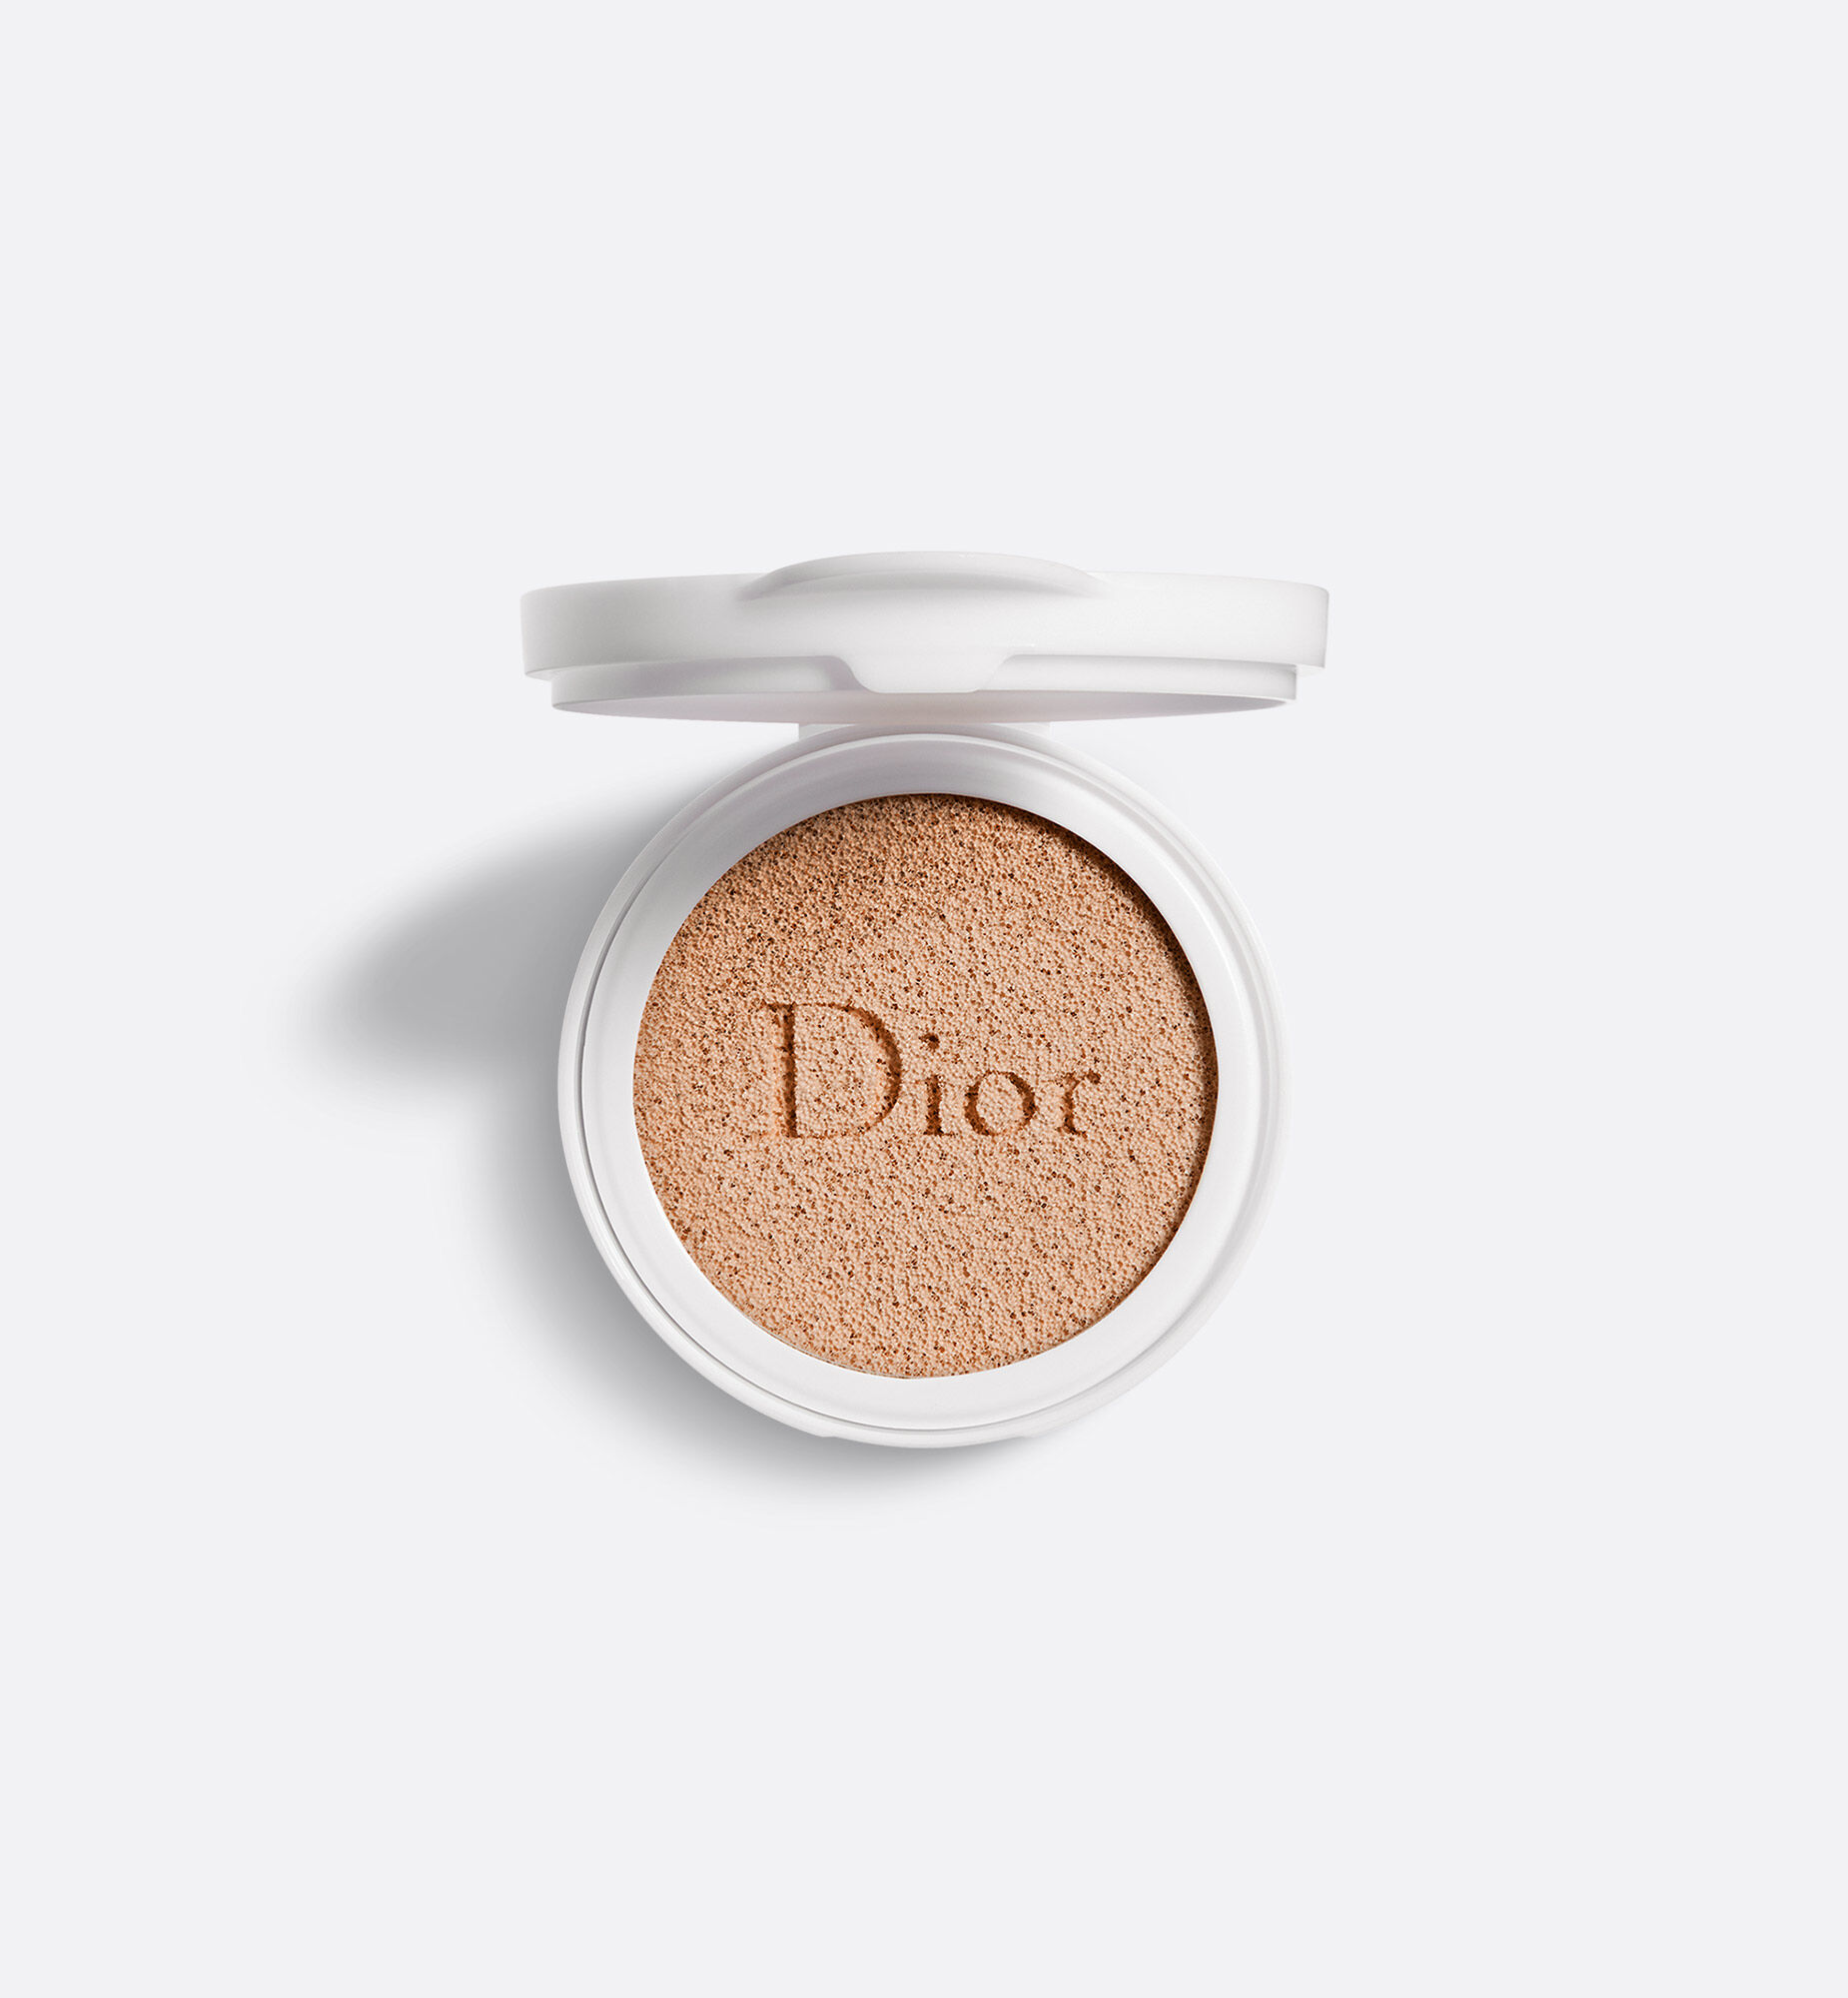 CHRISTIAN DIOR CAPTURE TOTALE DREAMSKIN PERFECT SKIN CUSHION SPF 50 WITH  EXTRA REFILL   010 2X15G05OZ trang điểm việt nam Makeup Vietnam